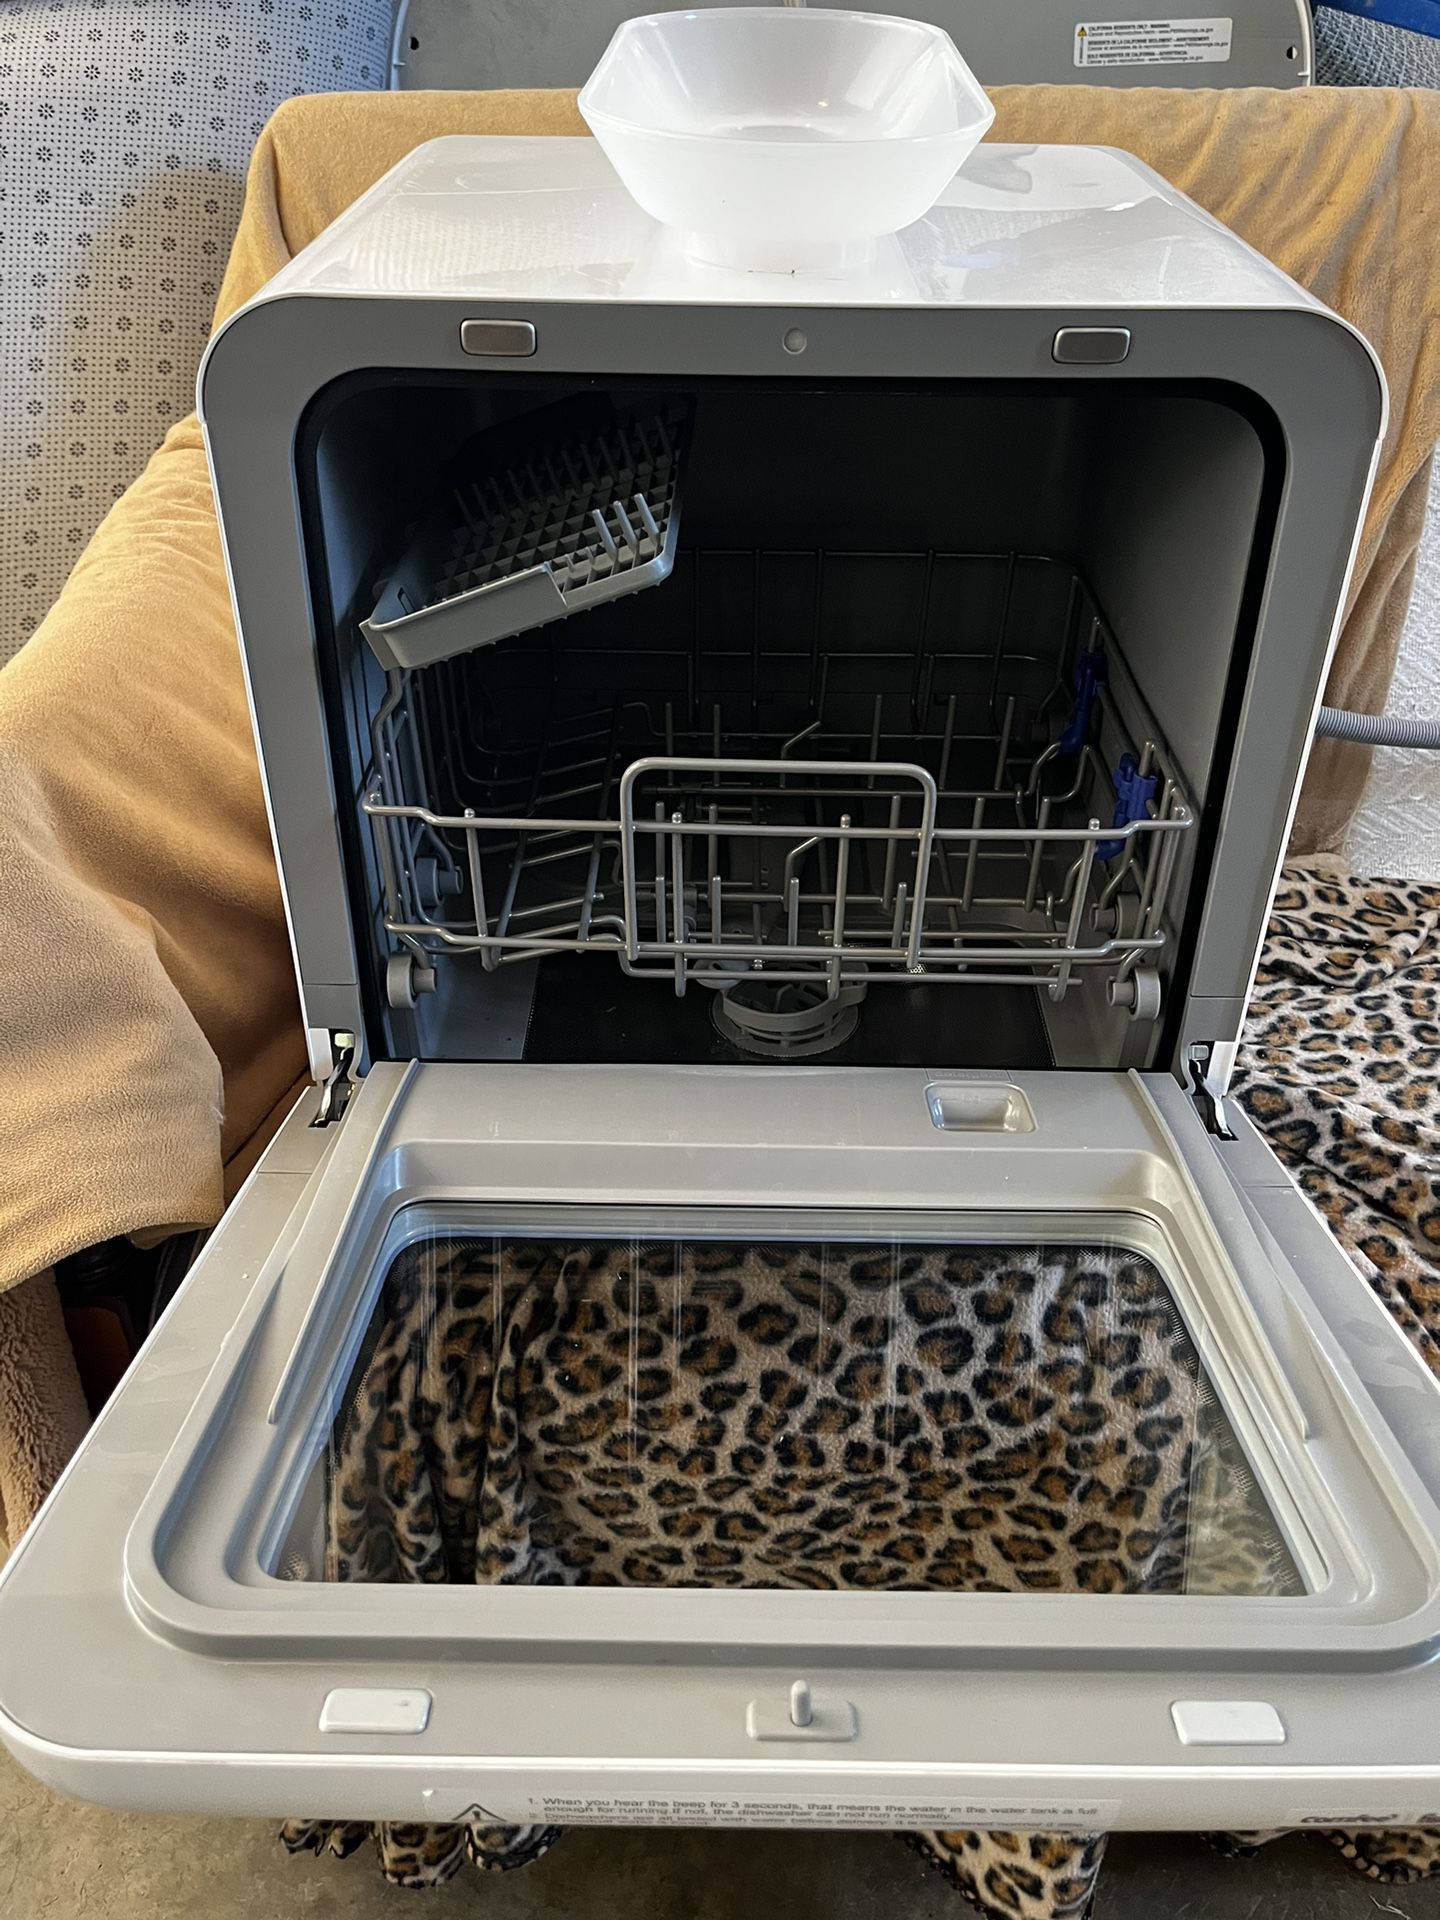 COMFEE' Countertop Dishwasher Portable Dishwasher with 6L Built-in Water  Tank for Sale in Charlotte, NC - OfferUp